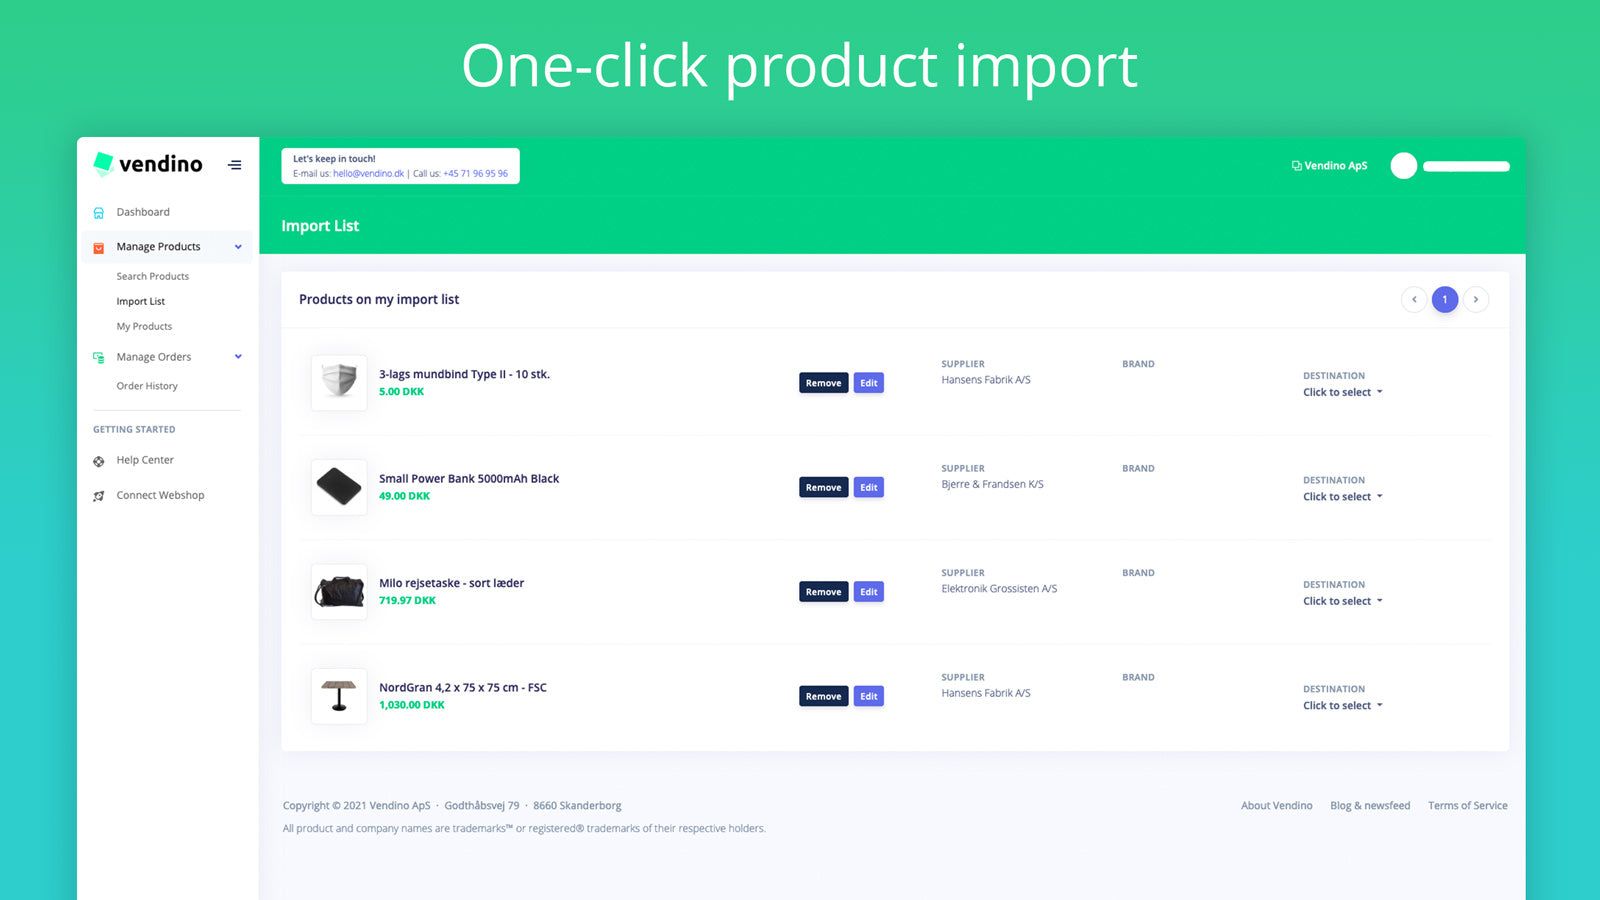 One-click product import